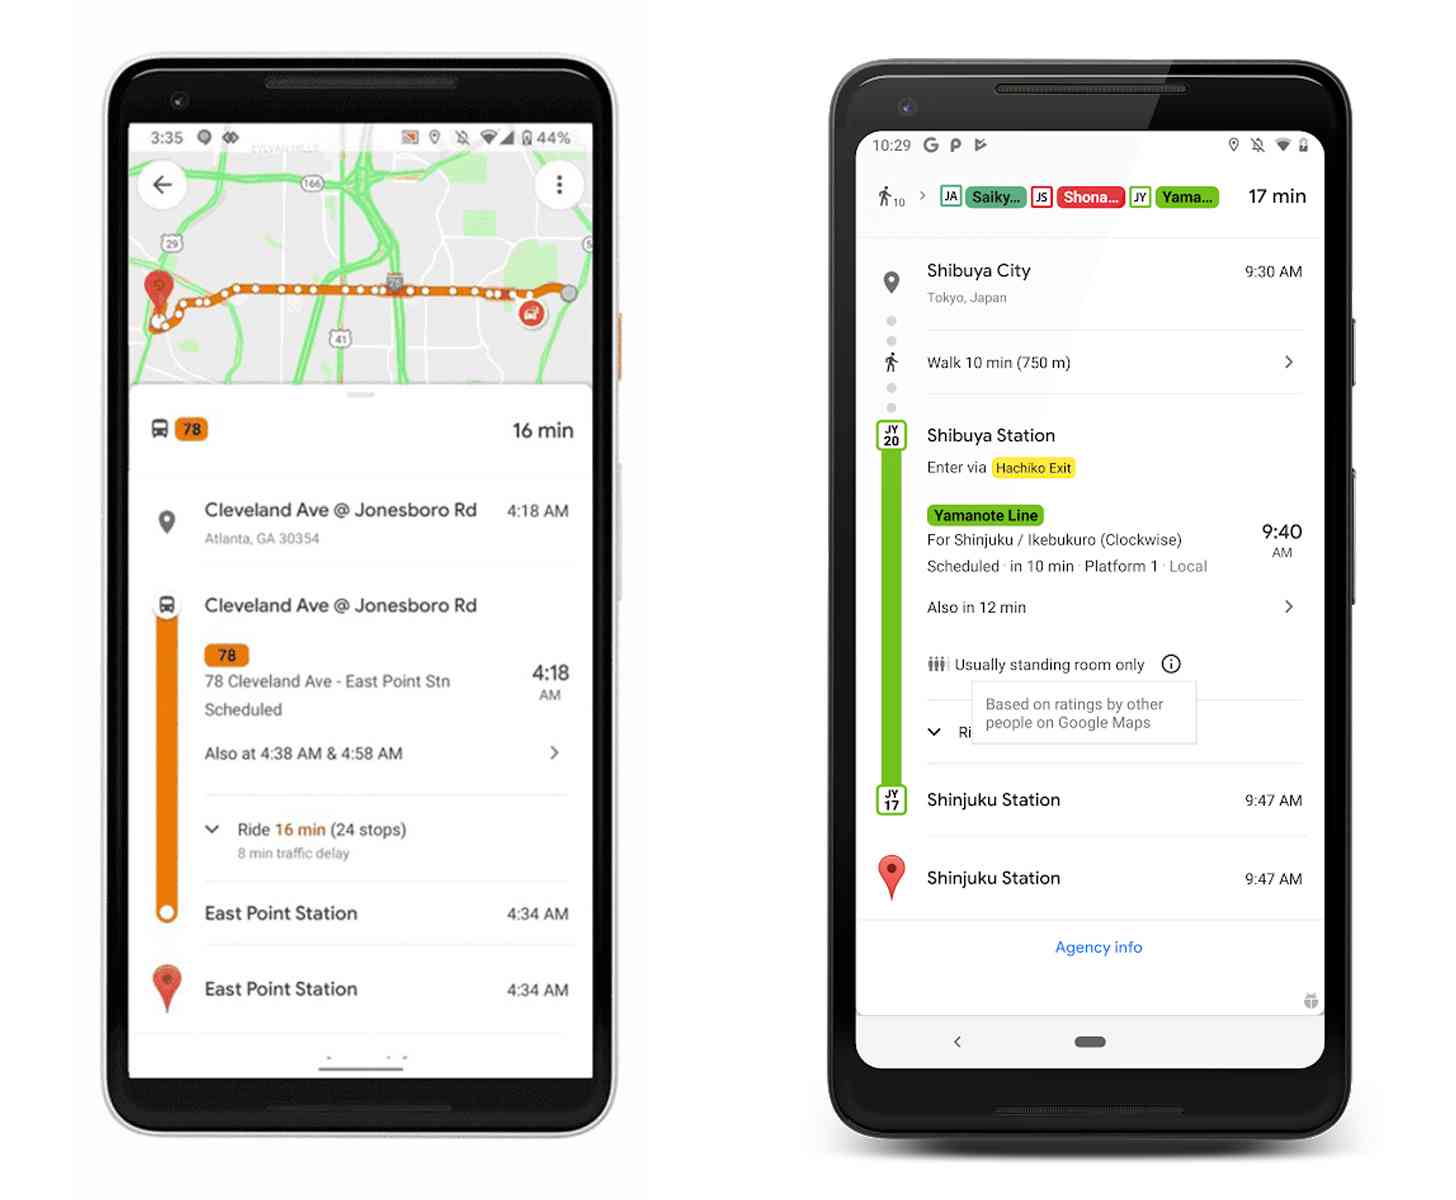 Google Maps live traffic info buses, crowdedness predictions